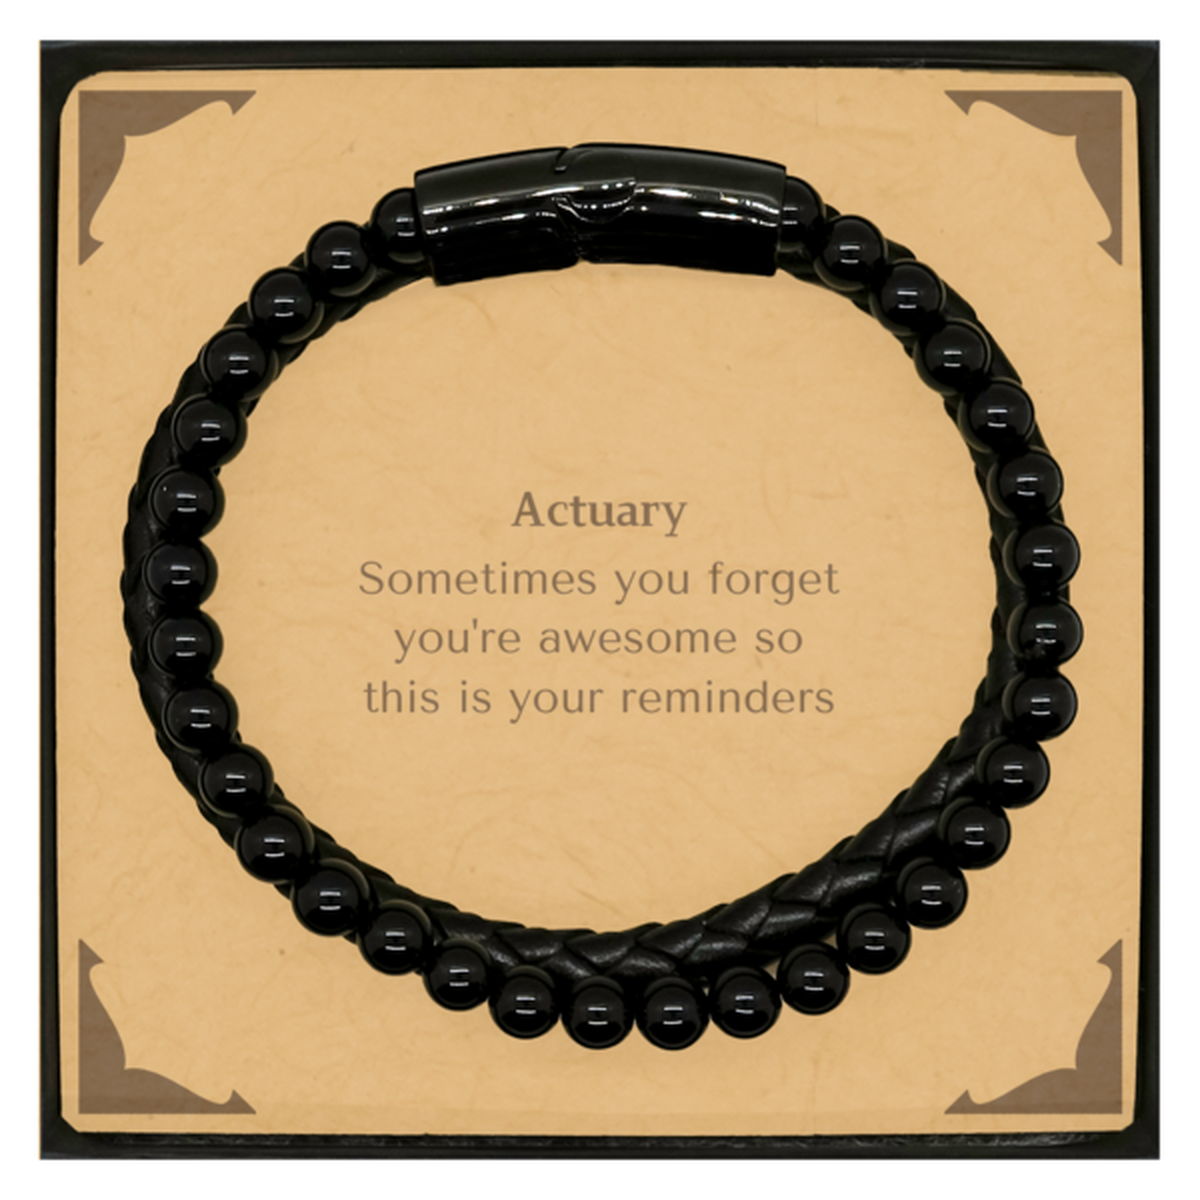 Sentimental Actuary Stone Leather Bracelets, Actuary Sometimes you forget you're awesome so this is your reminders, Graduation Christmas Birthday Gifts for Actuary, Men, Women, Coworkers